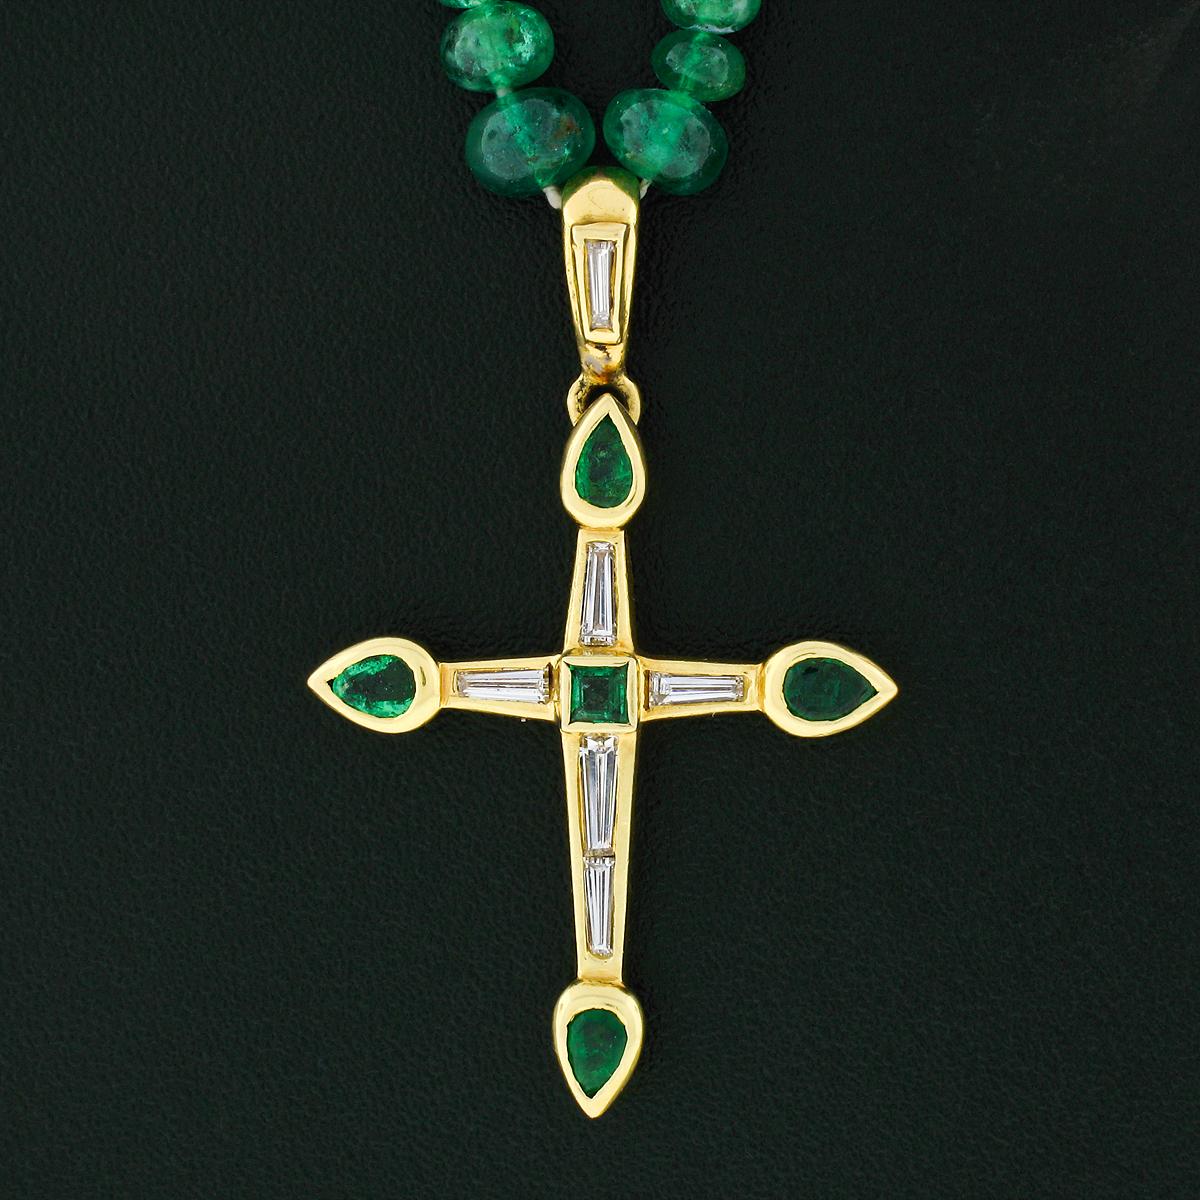 Here we have a beautiful vintage cross pendant crafted from solid 18k yellow gold hanging from a strand of GIA certified natural Emerald rondelle beads ranging from 2.30 to 4.41mm in diameter. One bead was selected at random for testing by GIA and